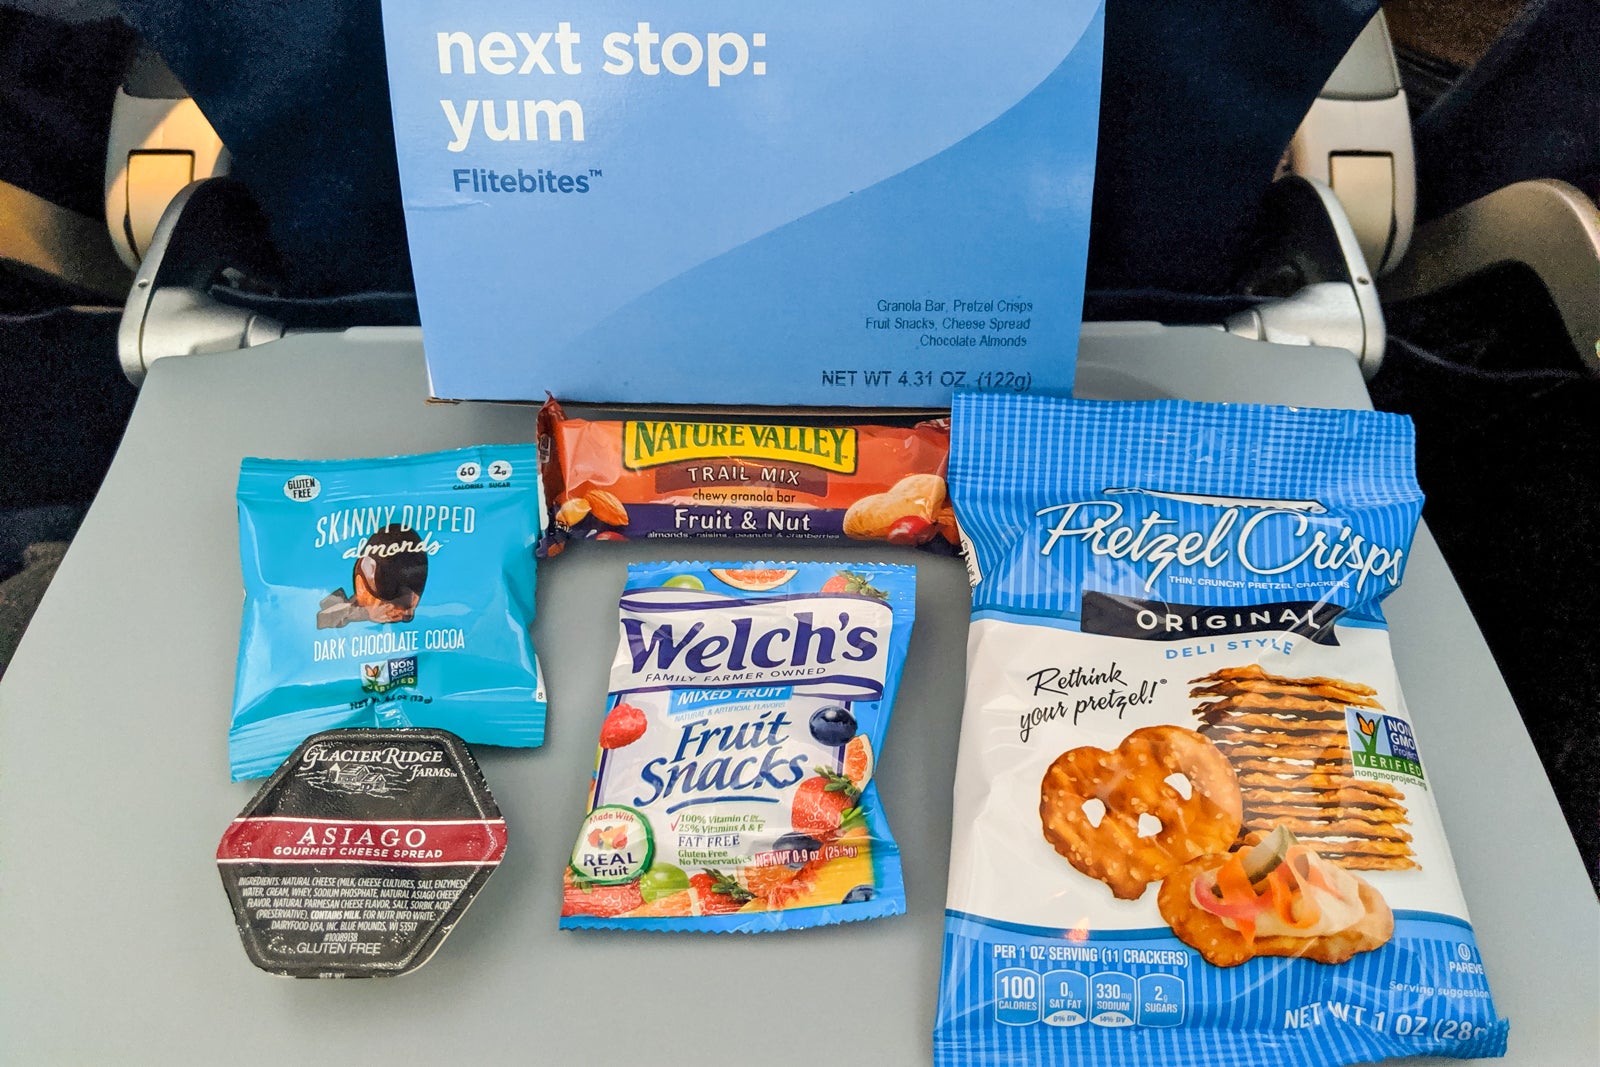 Review: Sun Country 737-800 From Minneapolis-Newark - The Points Guy